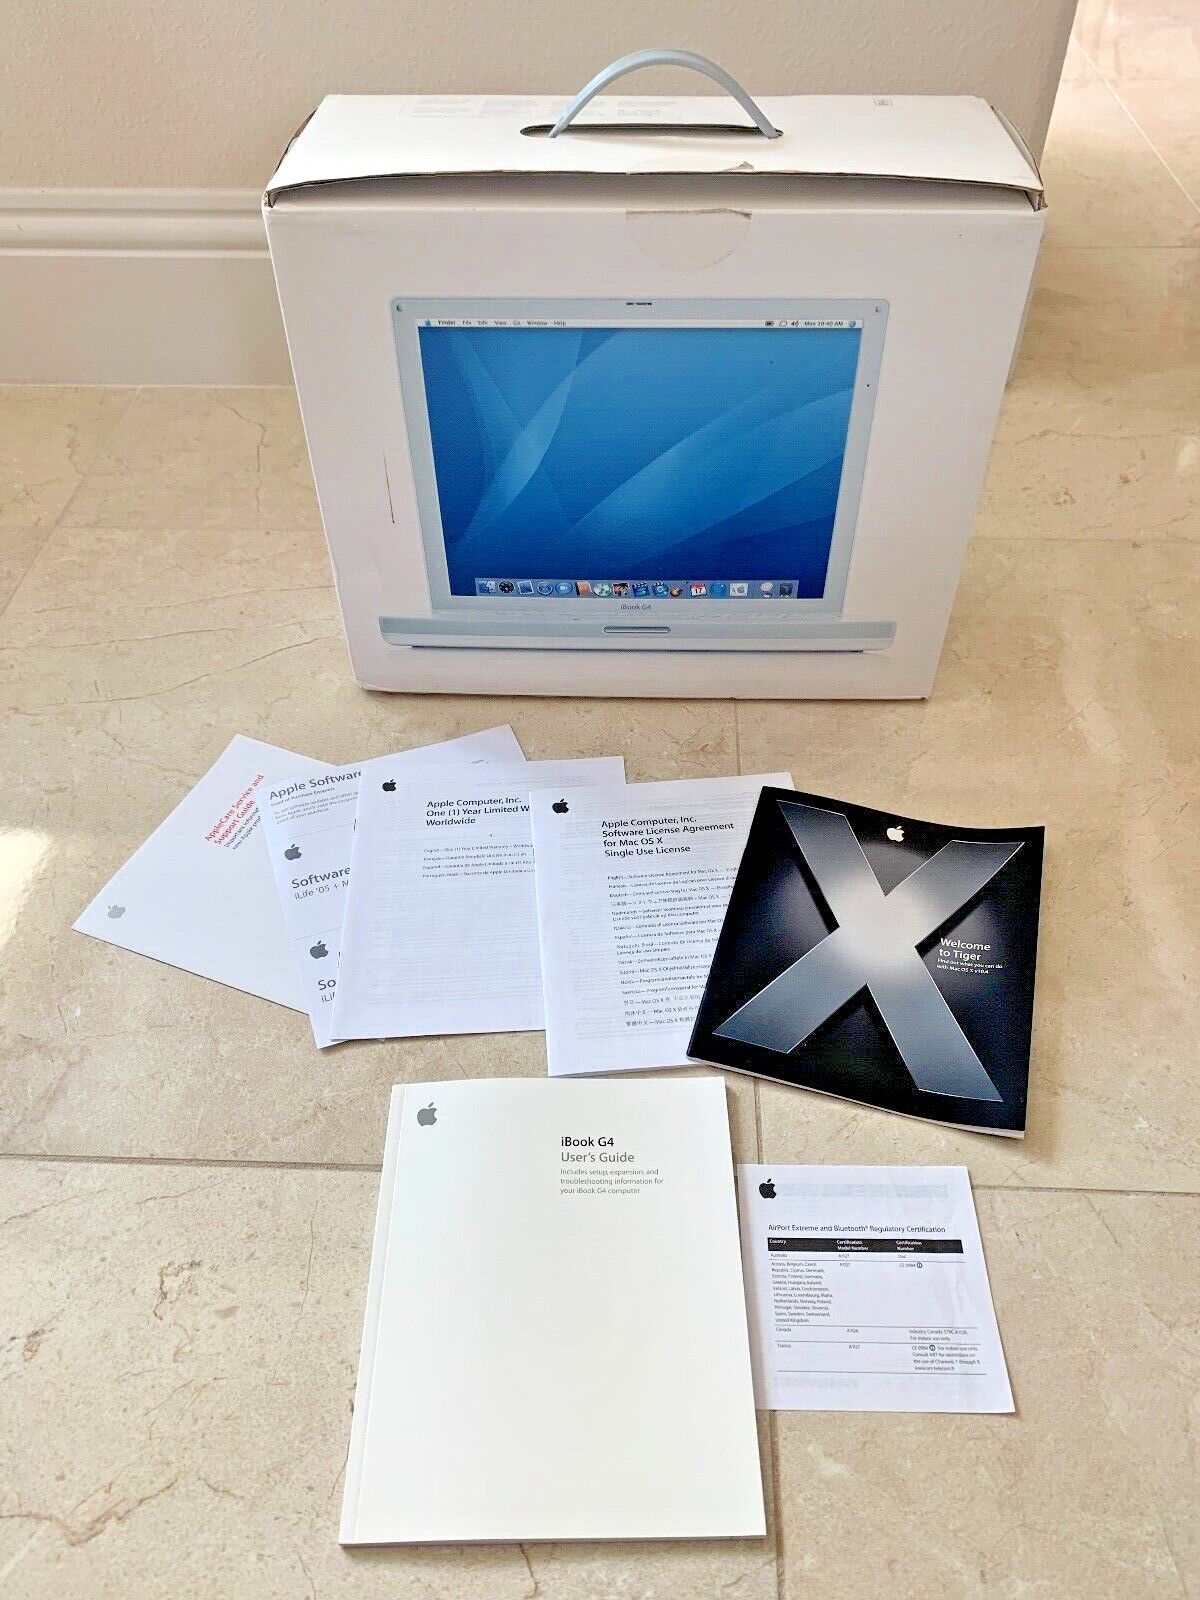 Vintage Apple iBook Laptop Computer 2005 Empty Box Mac OS X Users Guide, Tiger +